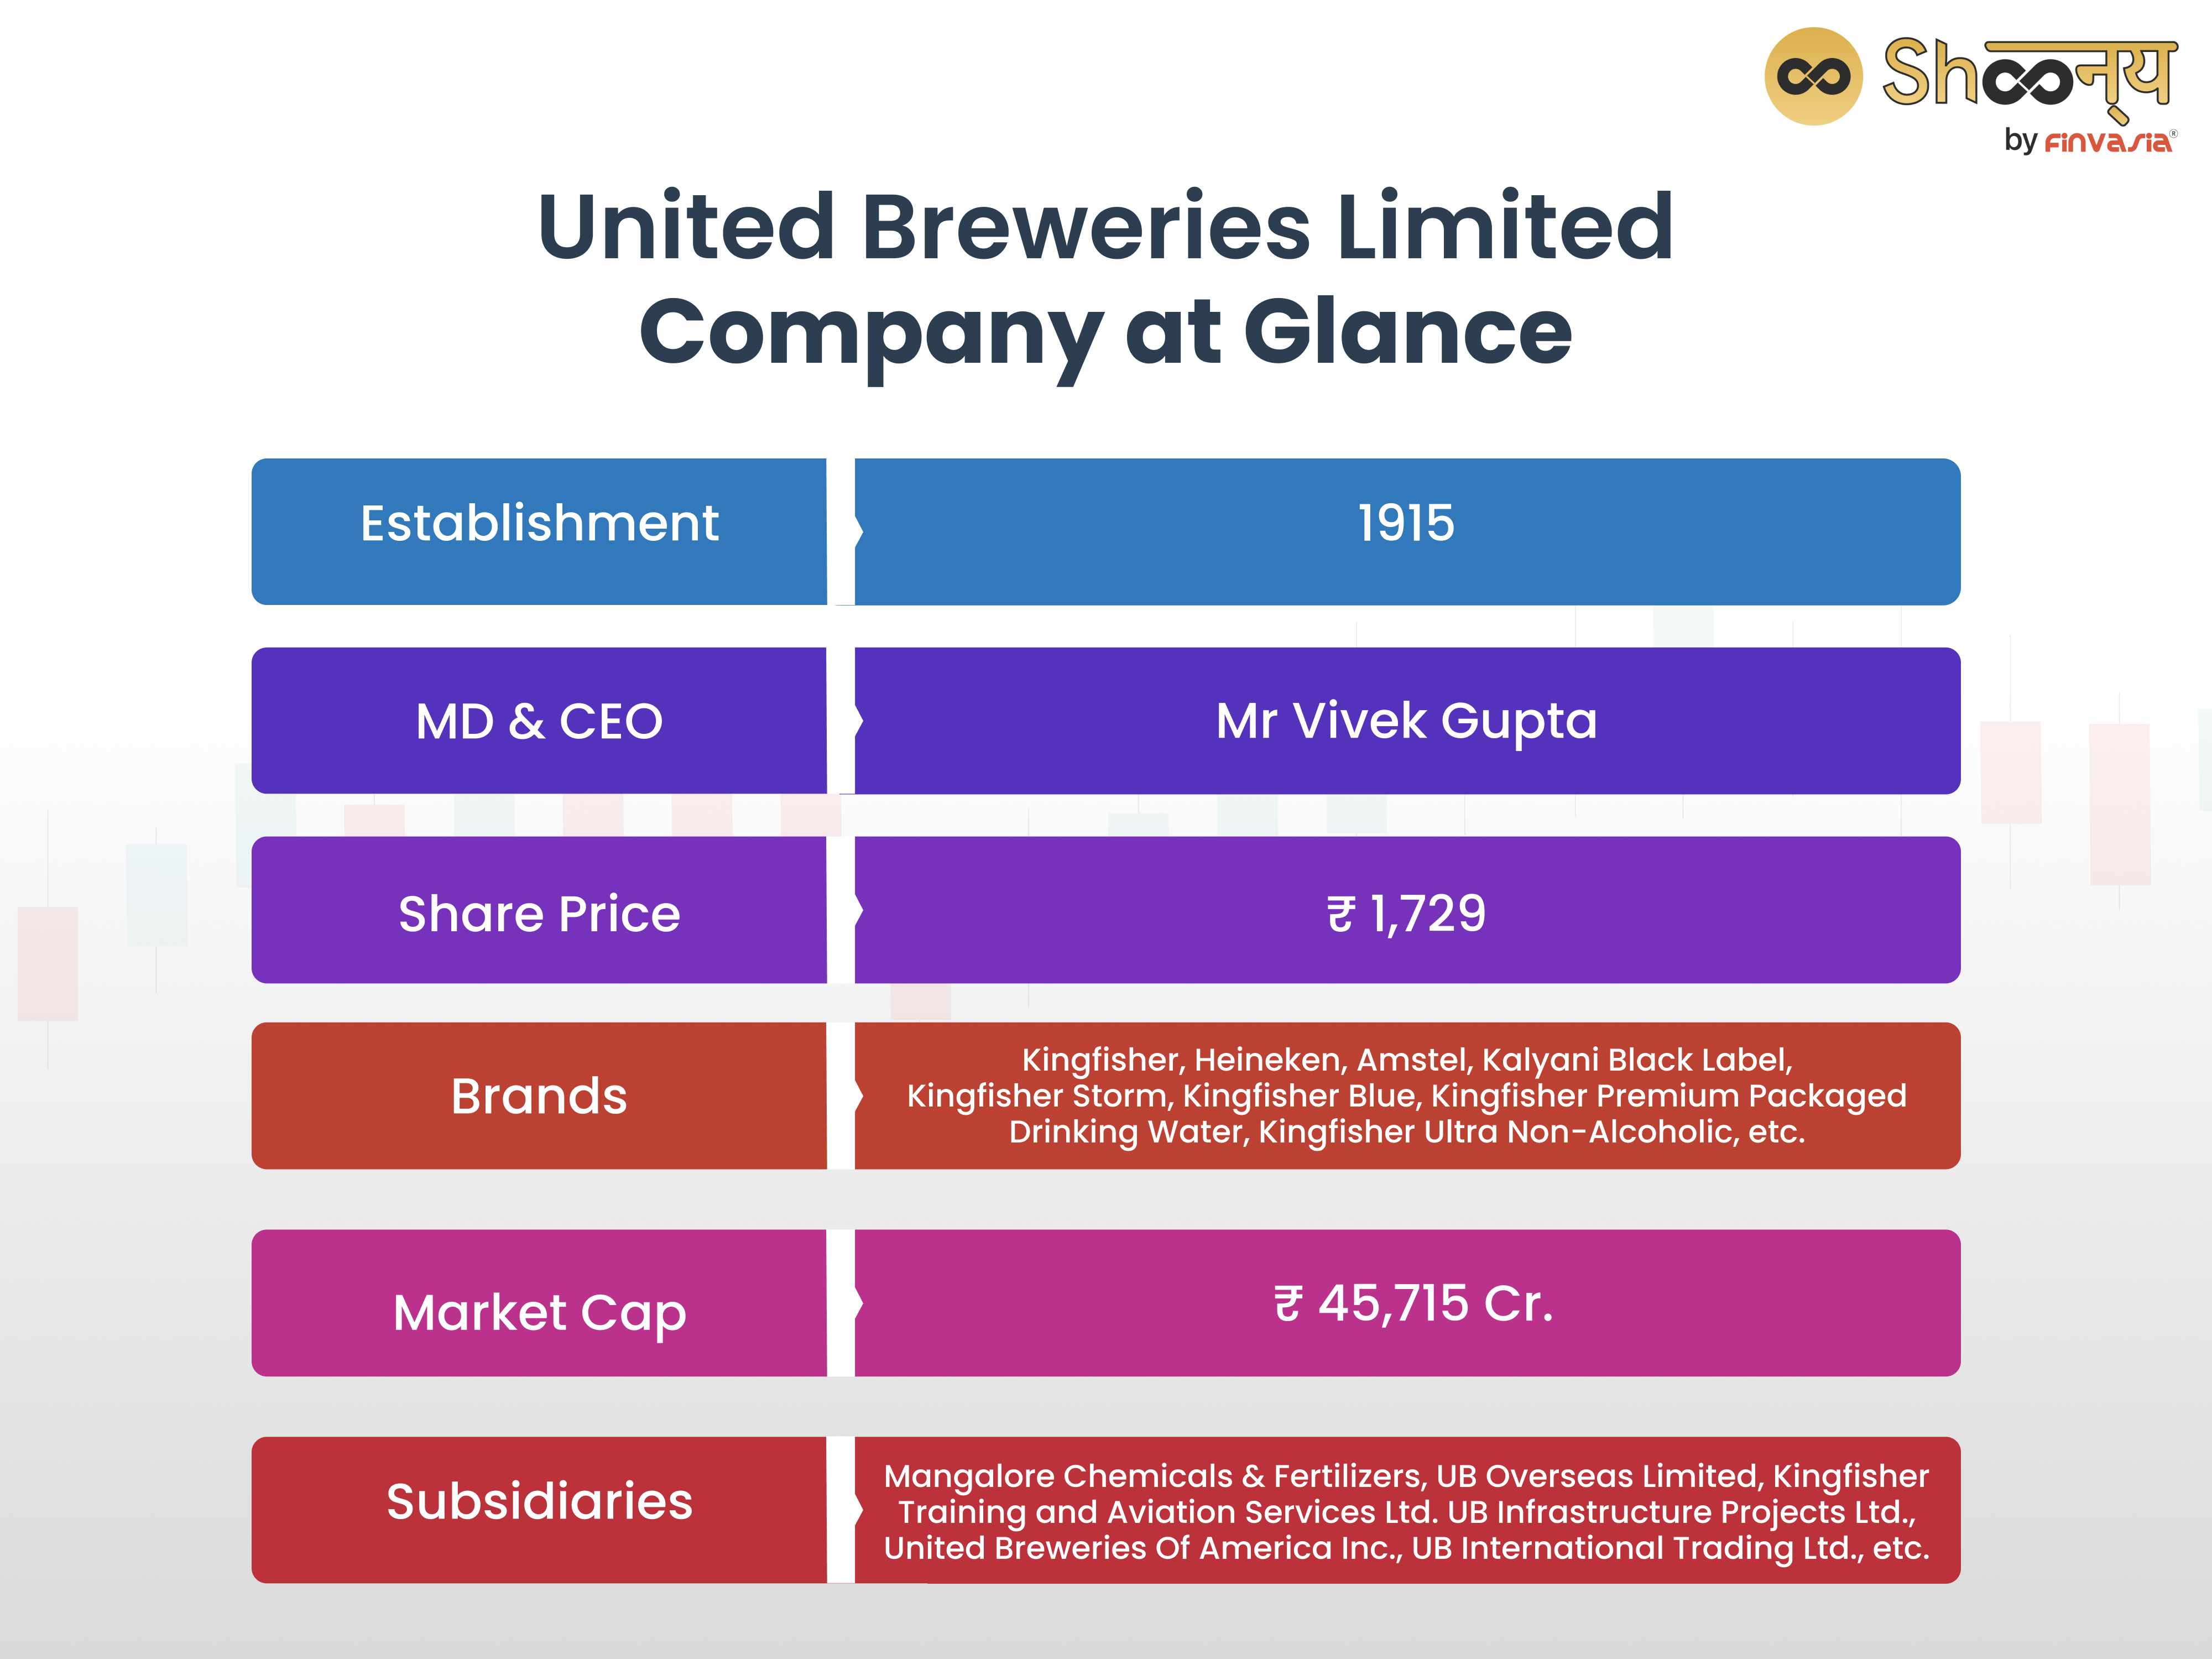 United Breweries Limited: Company At Glance